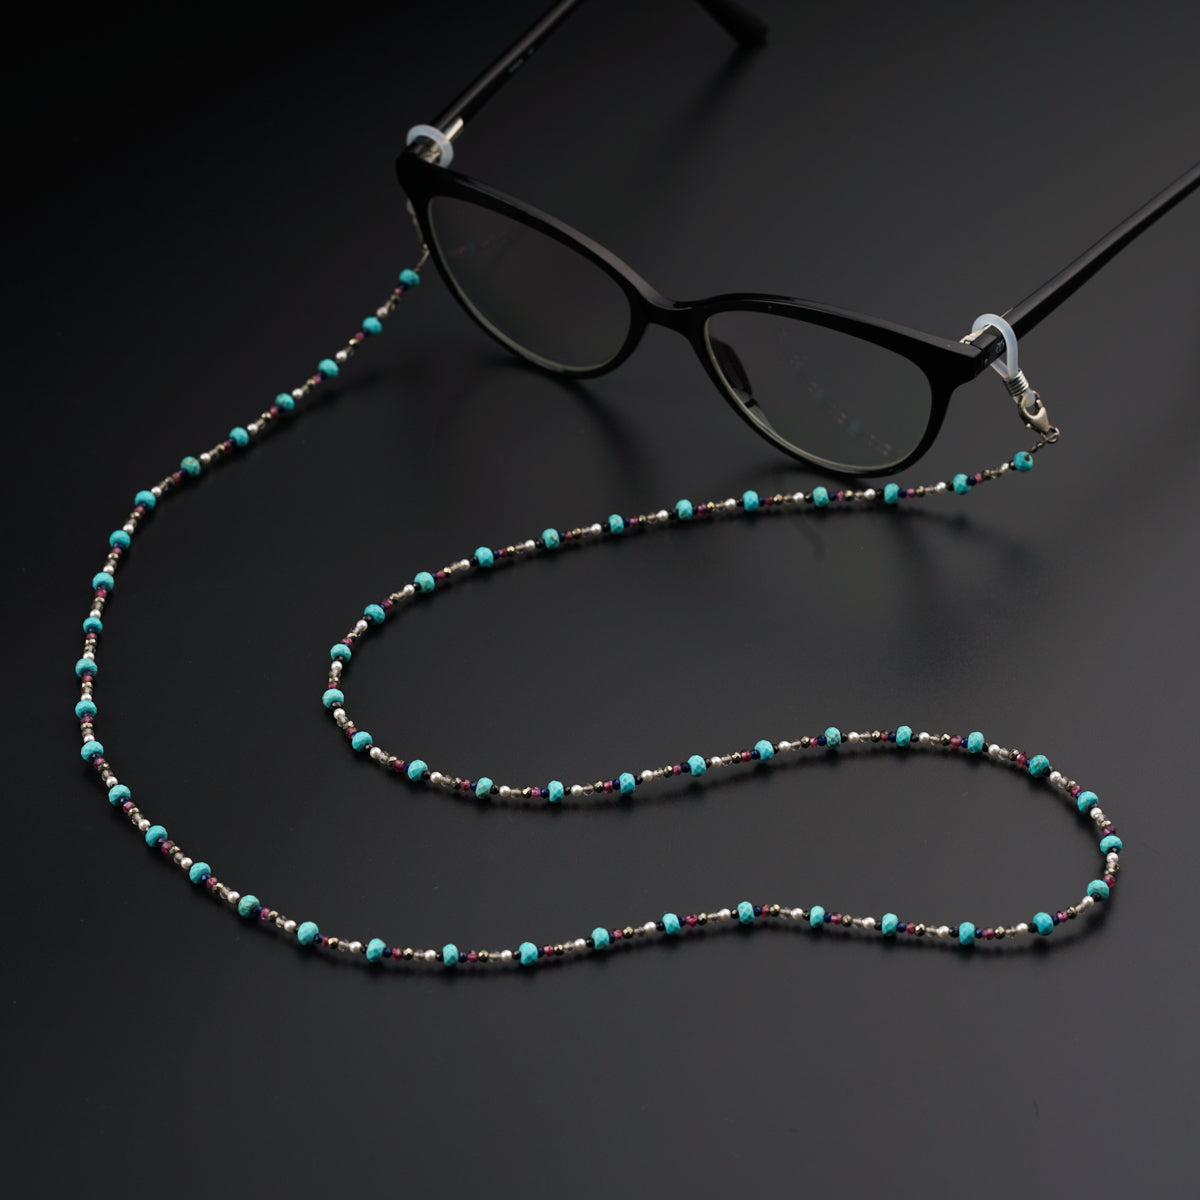 Eyewear Chain with Assorted Stones